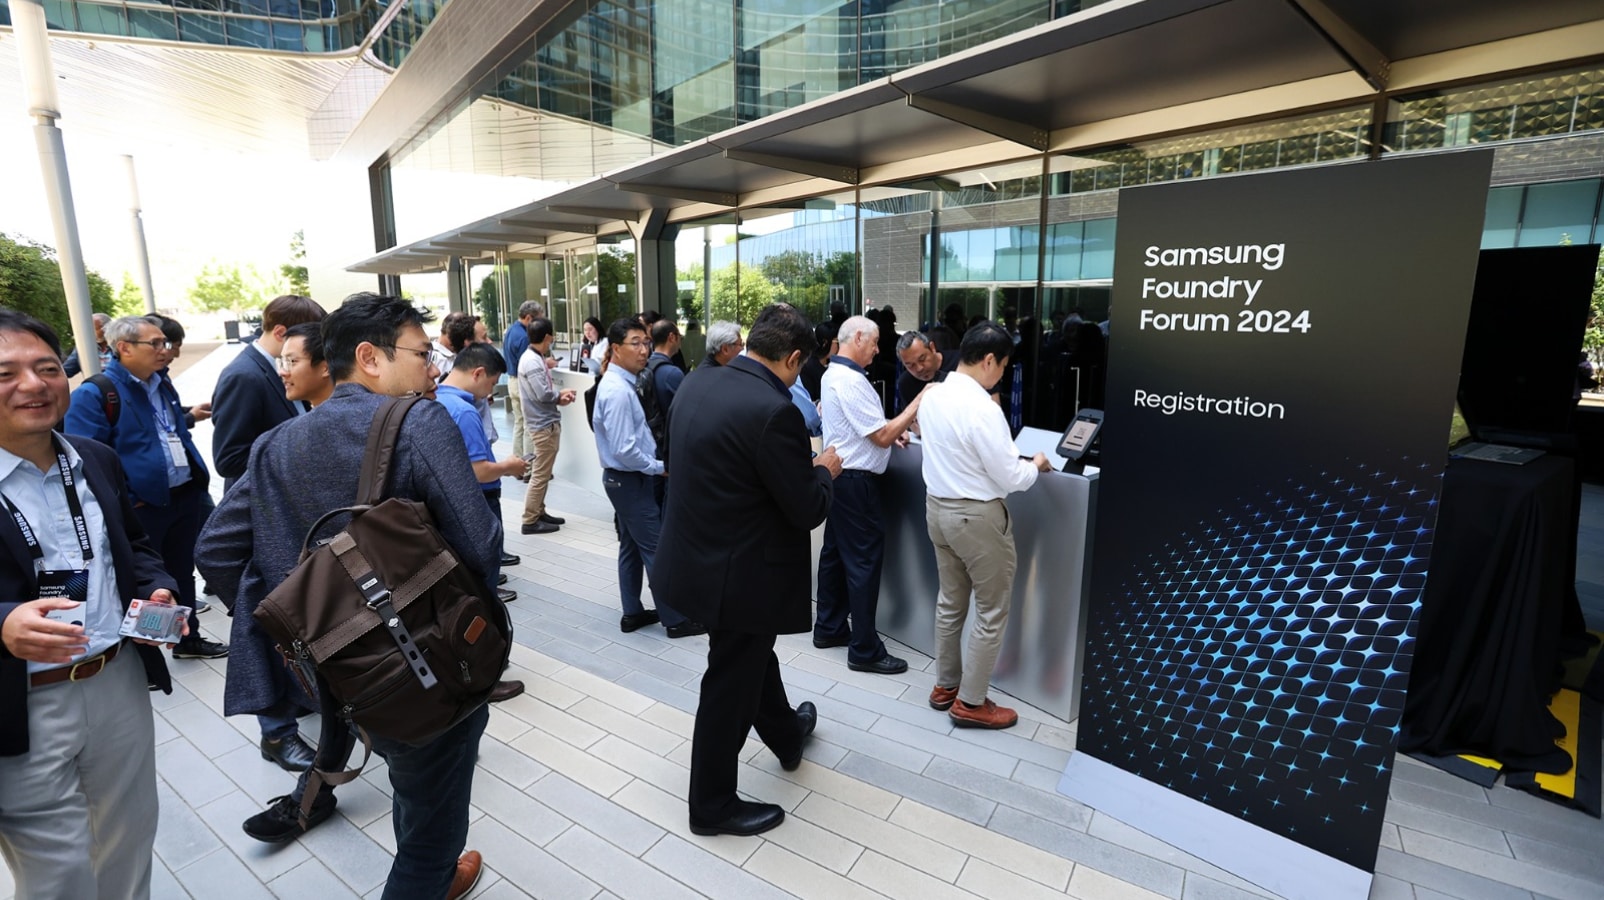 Samsung Foundry Forum 2024 held in Silicon Valley, USA on June 12.